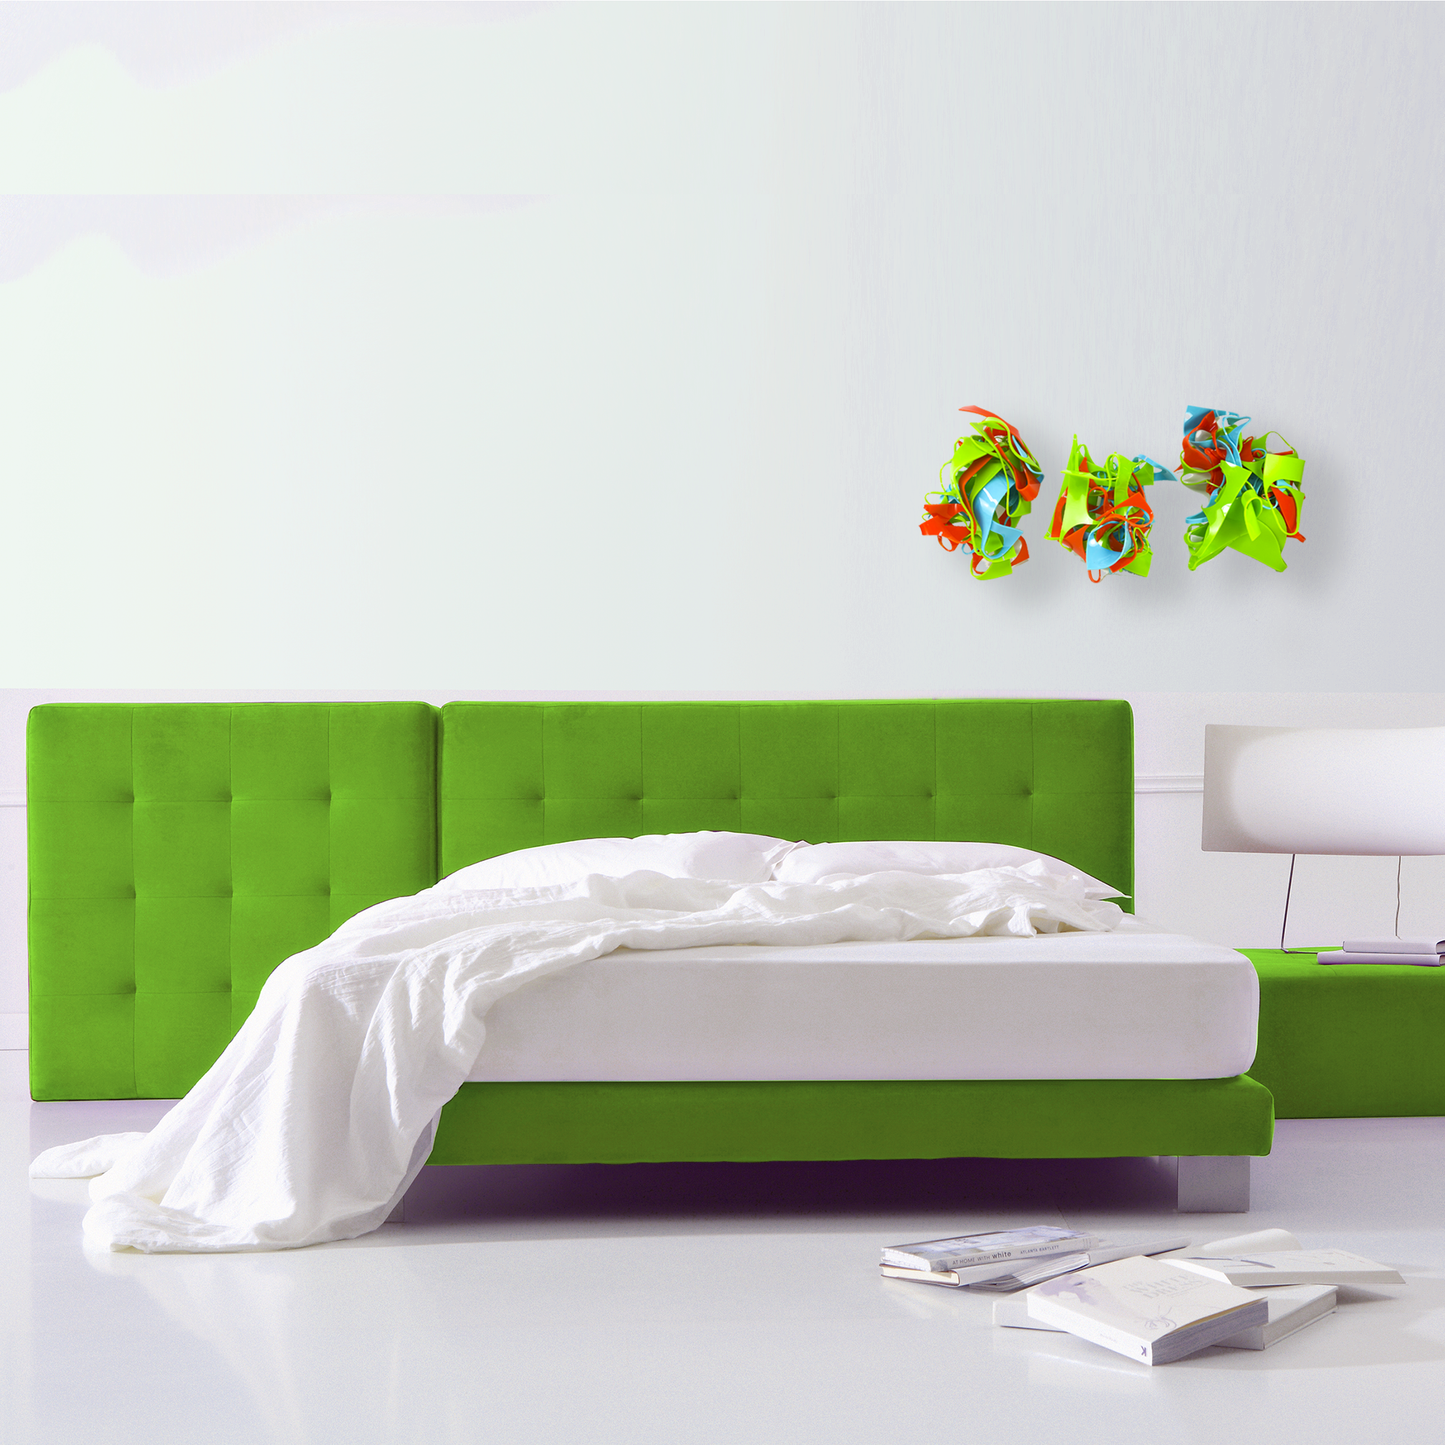 Colorful 3D wall art hanging over modern lime green bed in contemporary bedroom  in a vertical row in Lime Green, Aqua Blue, and Orange - recycled acrylic abstract 3D wall art by AtomicMobiles.com